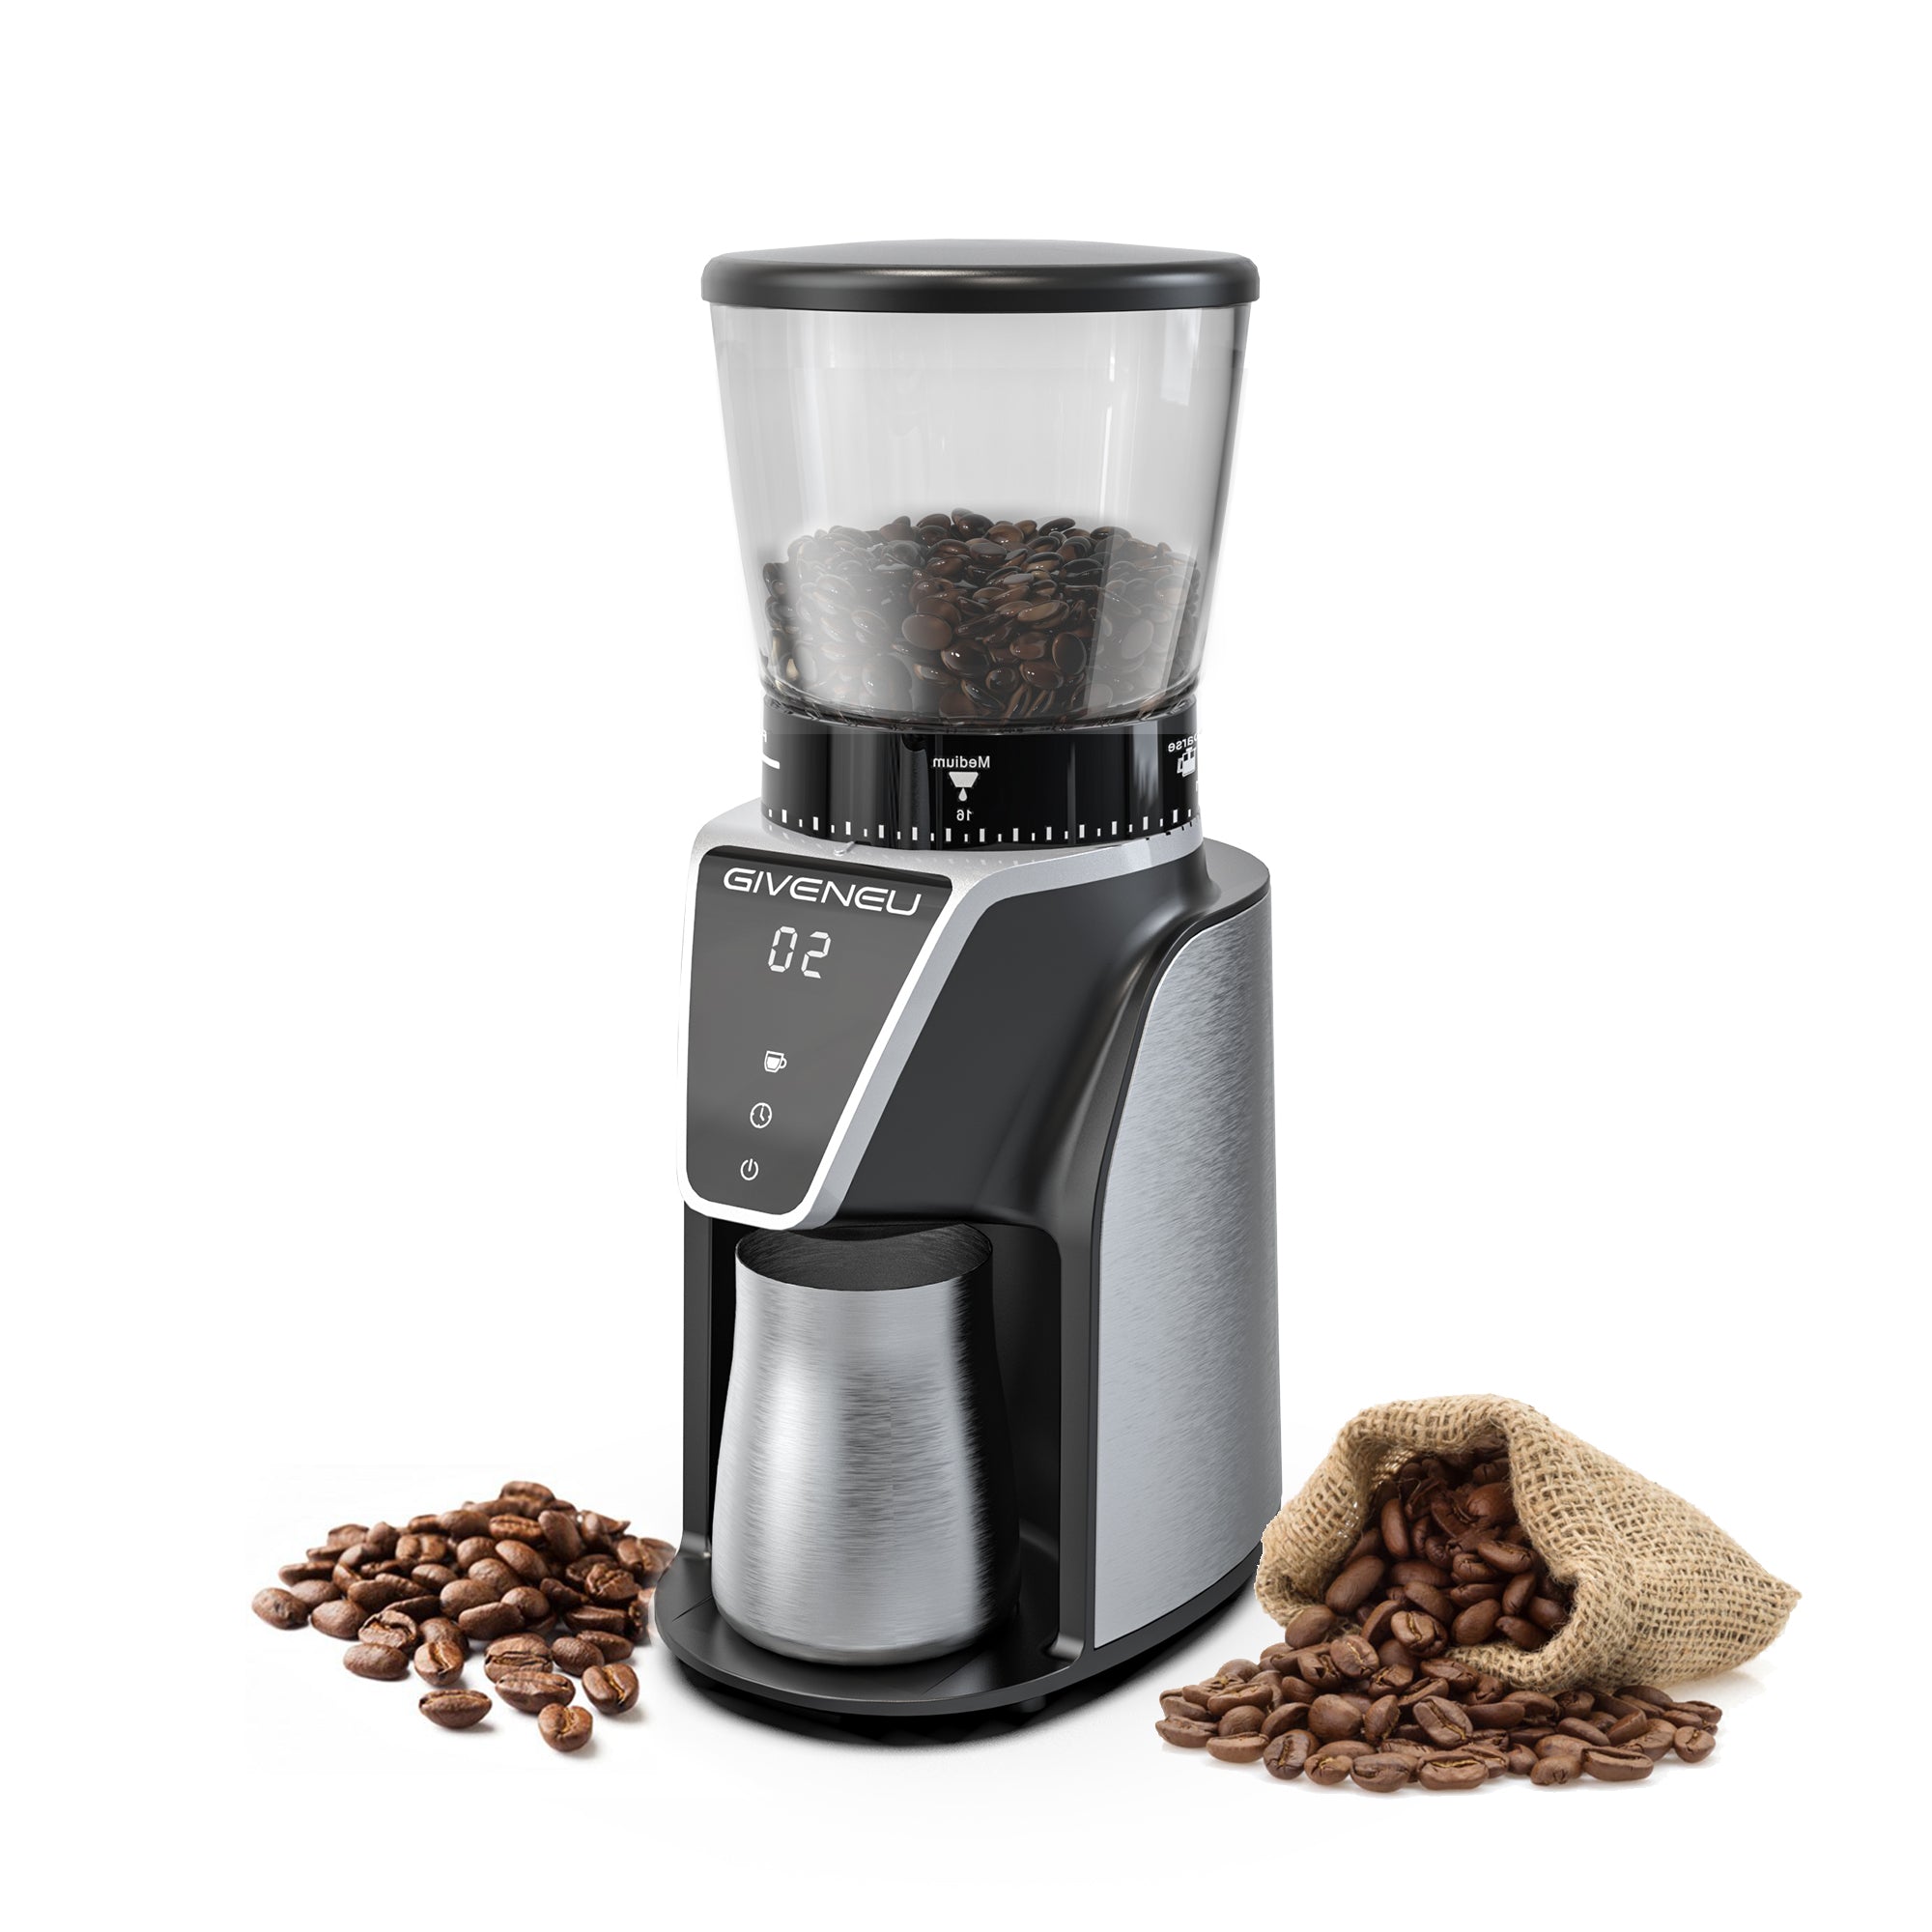 How to Pick the Right Burr Coffee Grinder in 2020?